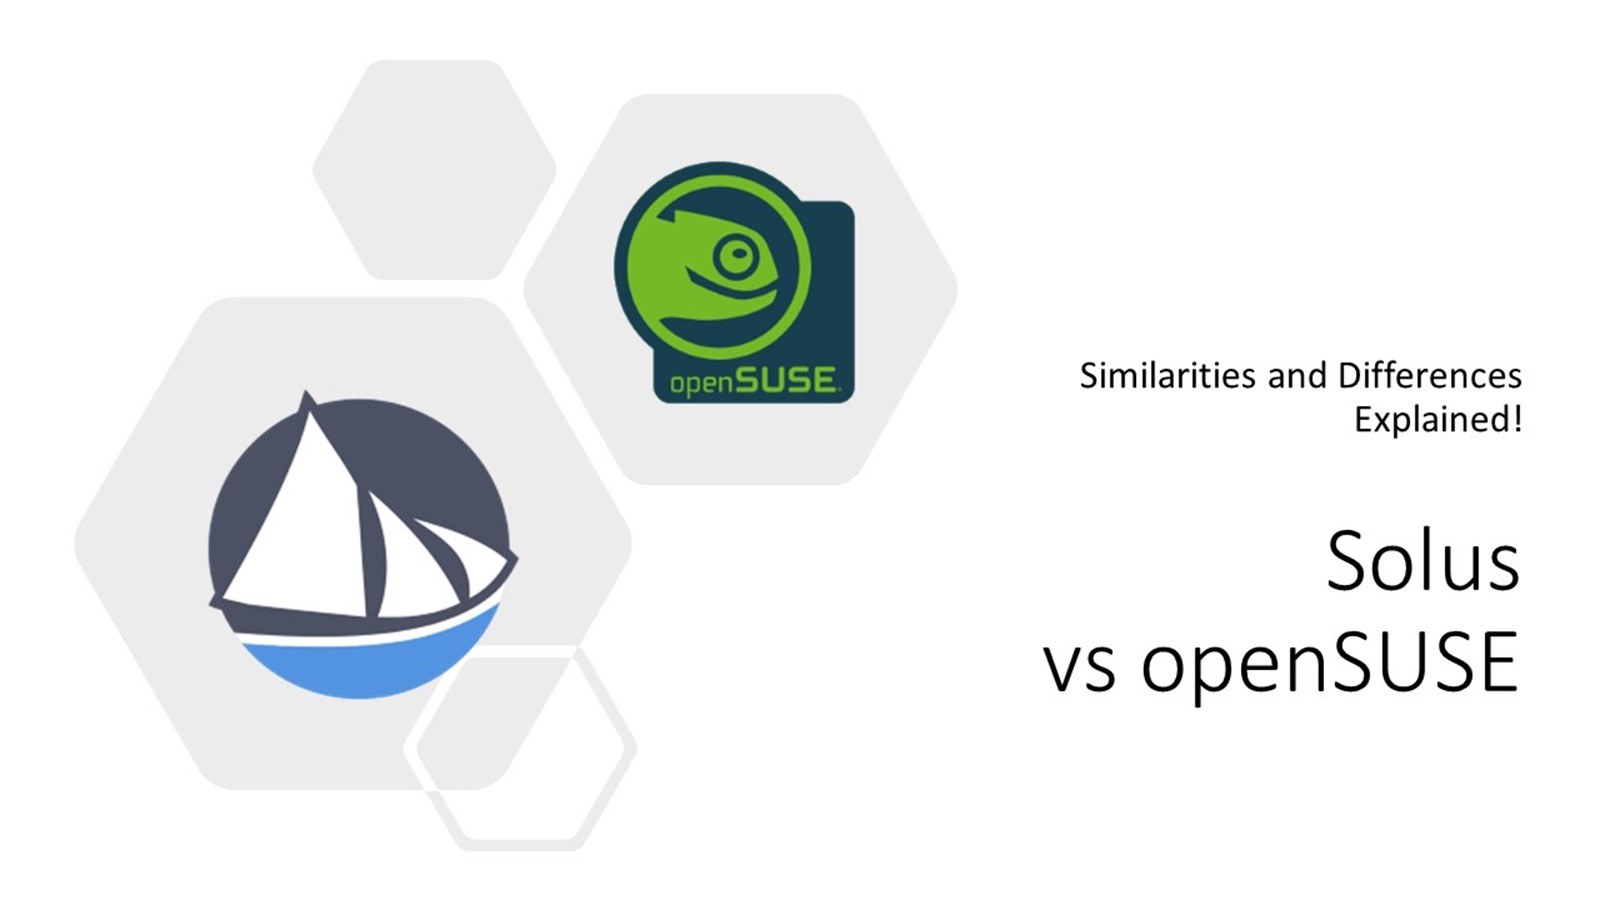 Solus vs OpenSUSE: Similarities & Differences!